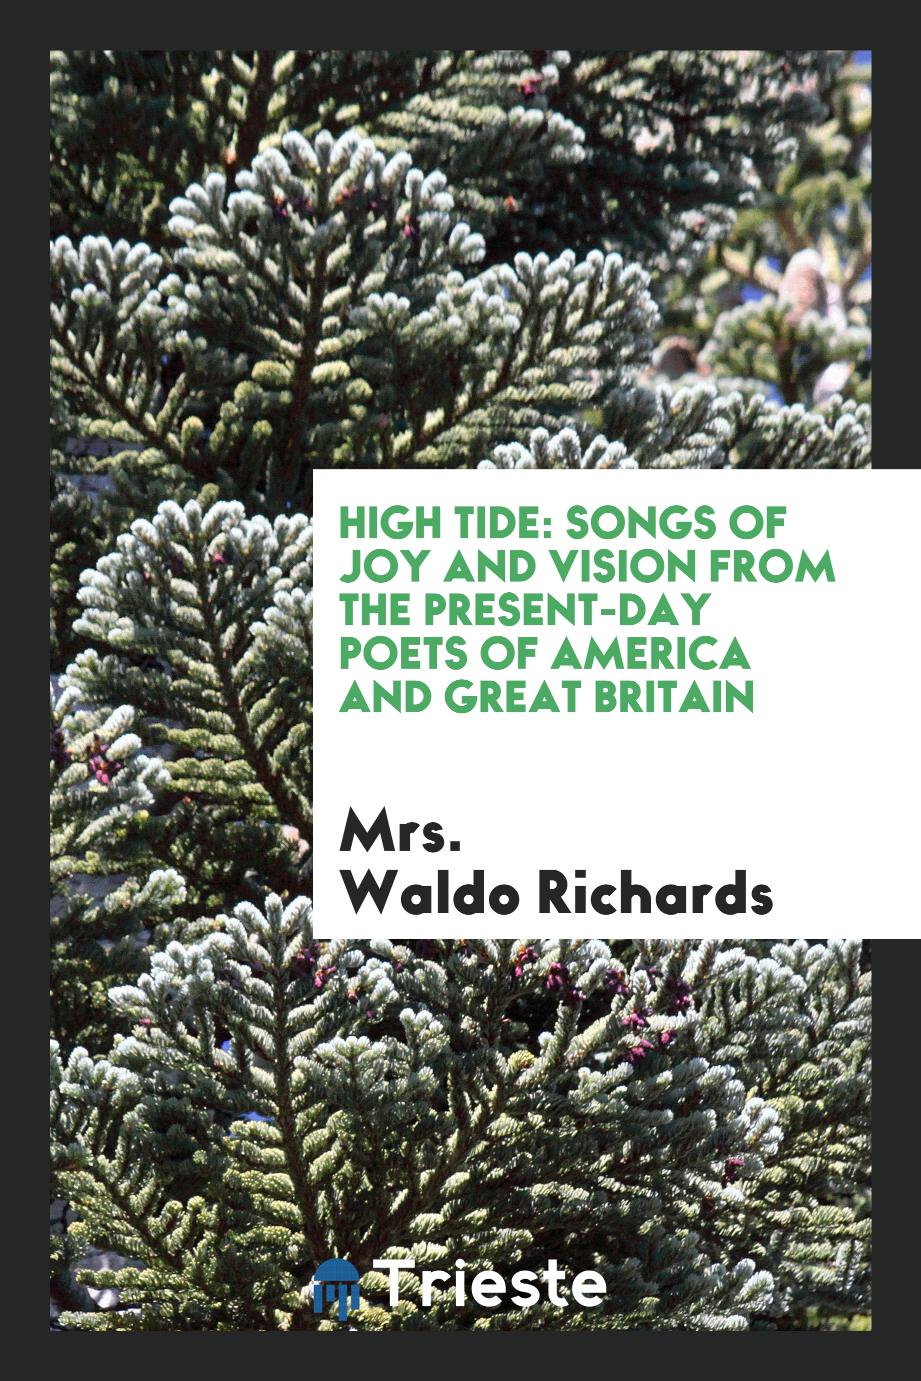 High Tide: Songs of Joy and Vision from the Present-Day Poets of America and Great Britain